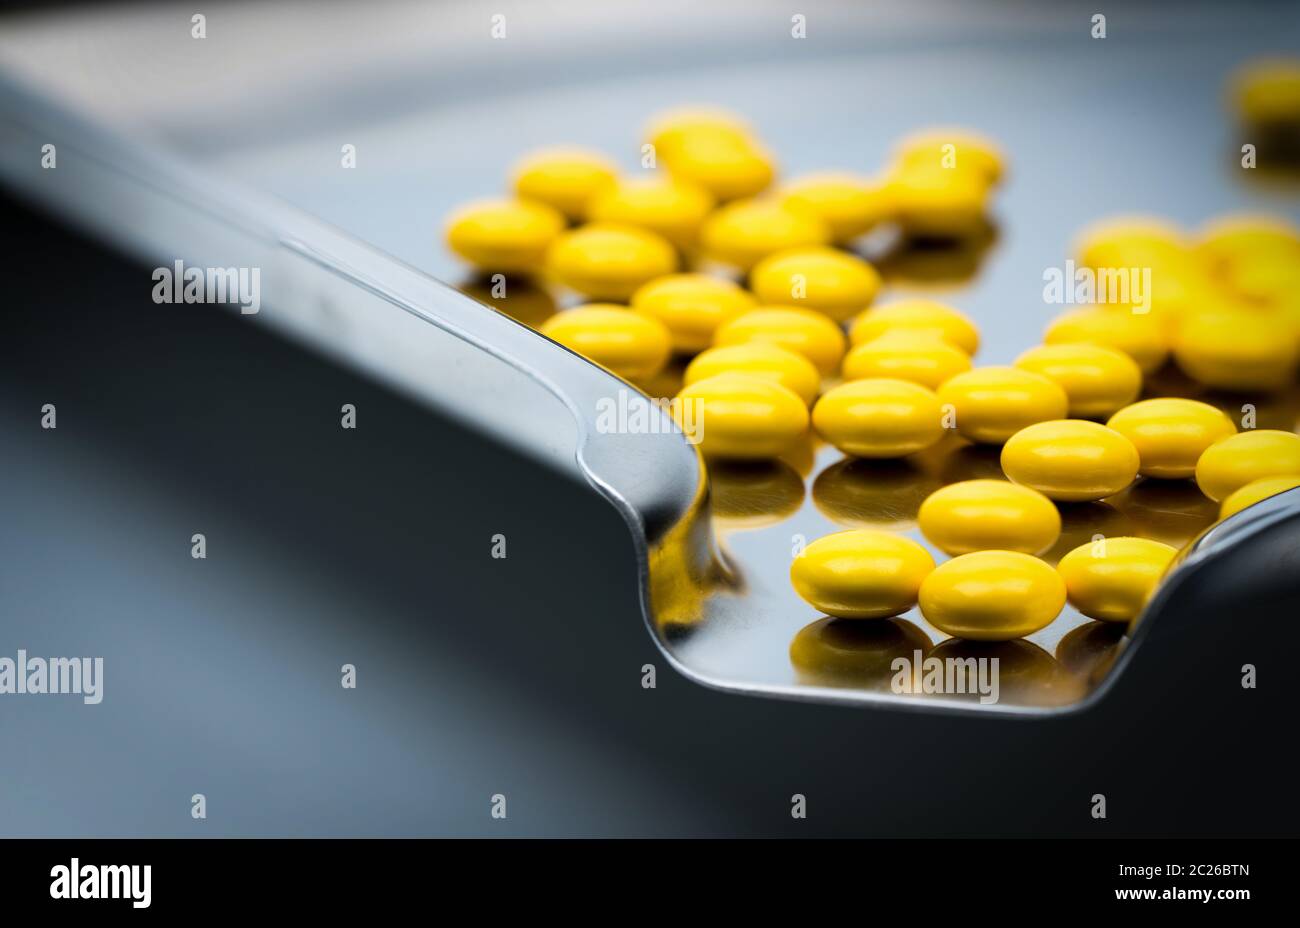 Yellow round sugar coated tablets pills on stainless steel drug tray Stock Photo